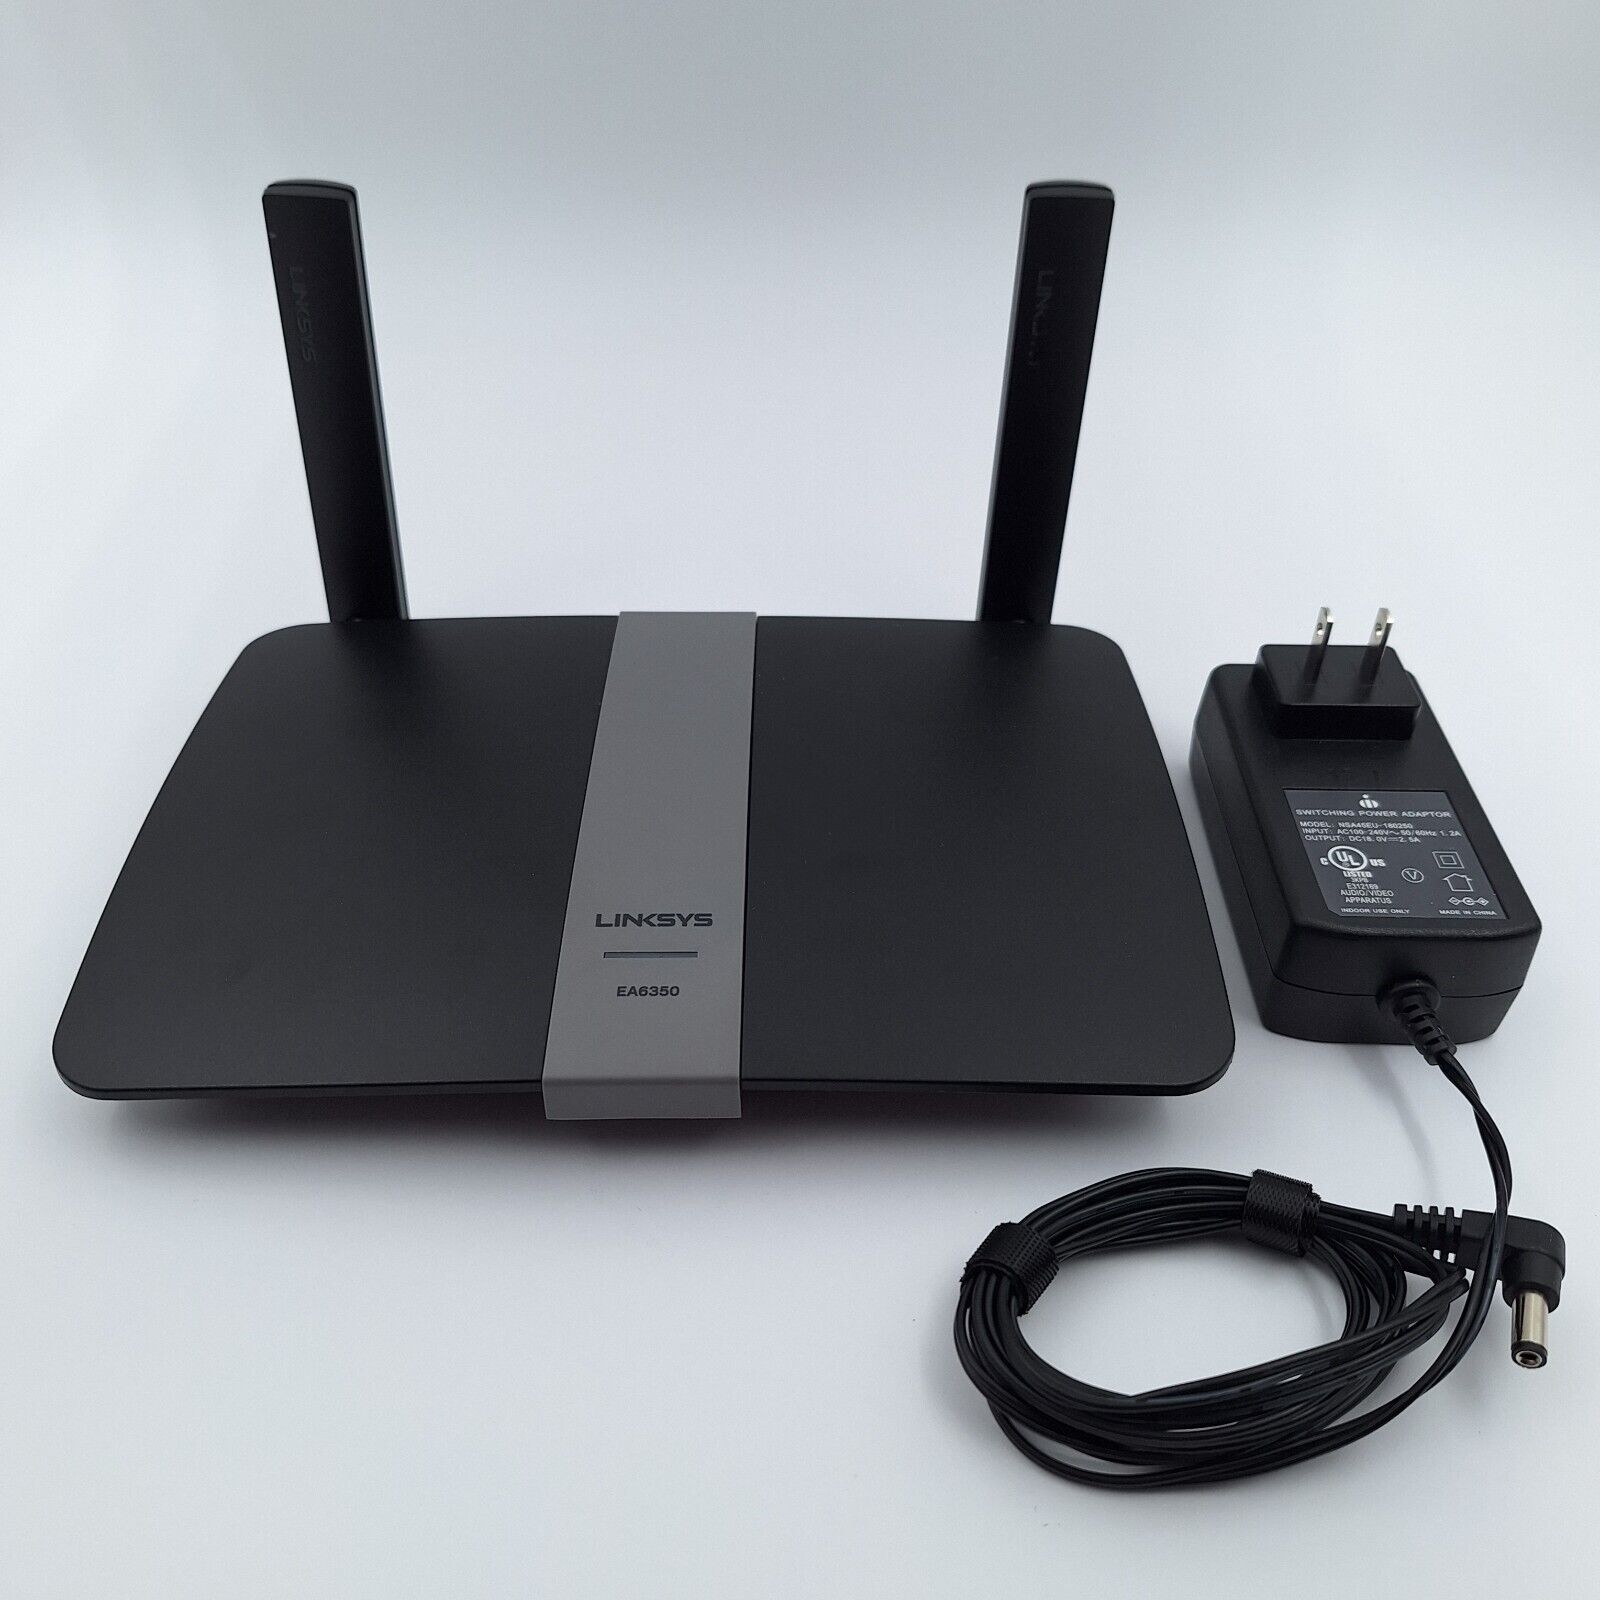 Linksys EA6350 V3 AC1200 Dual-Band 4-Port Wi-Fi Wireless Router - Tested/Works